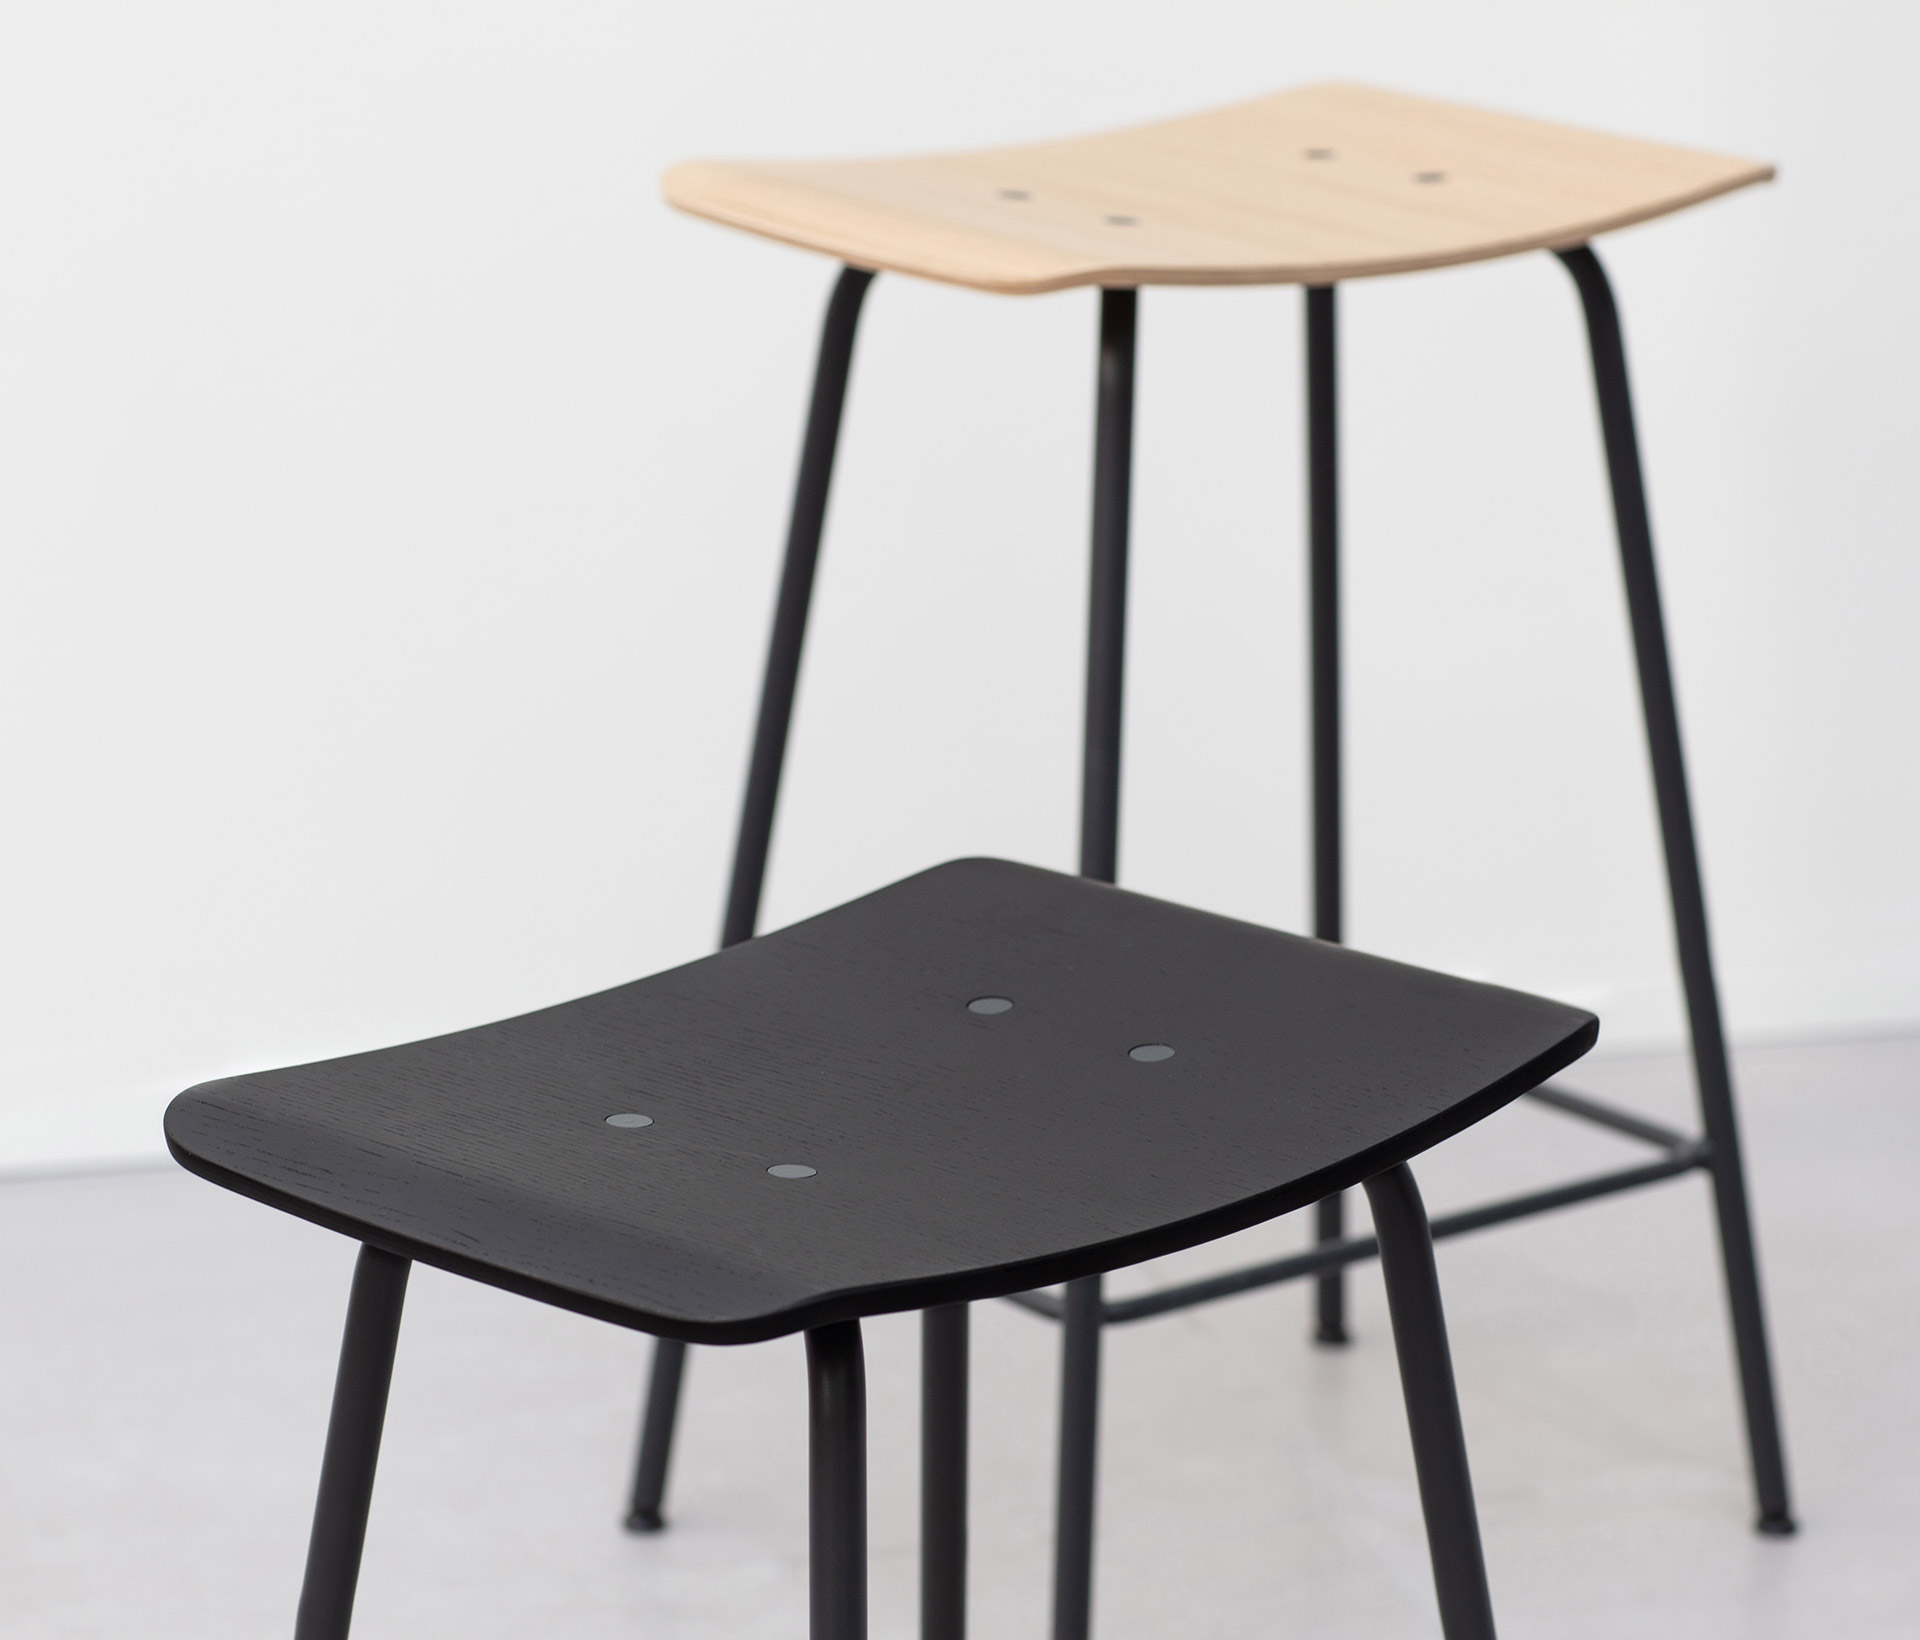 Two wooden Share office stools, one with a black seat and one with a wooden seat.